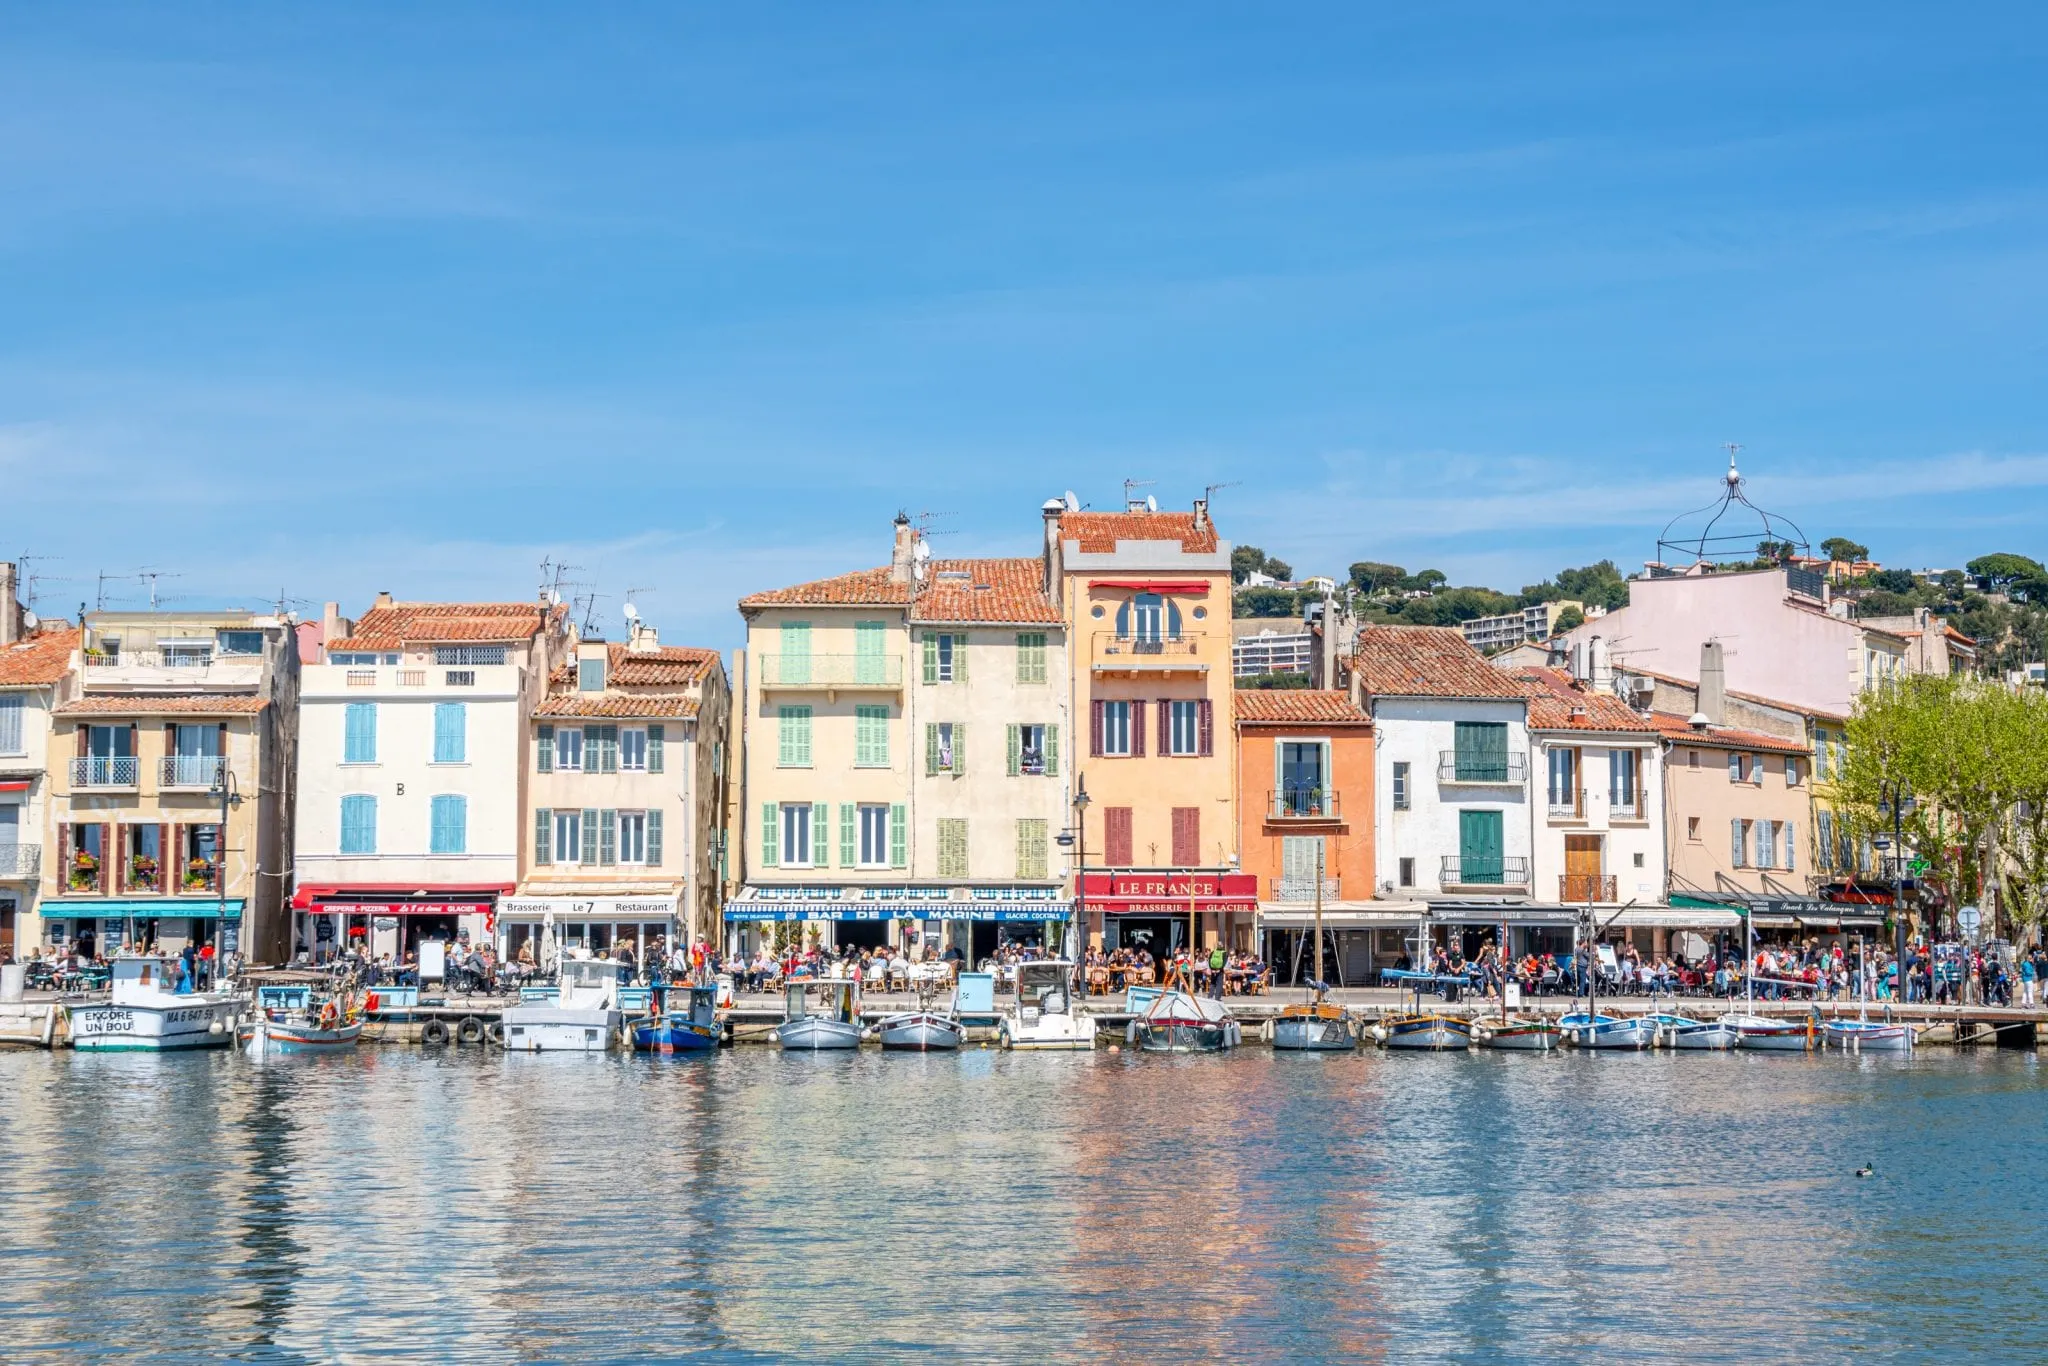 Buildings in front of harbor of Cassis France, their reflections are on the water in the bottom half of the photo.